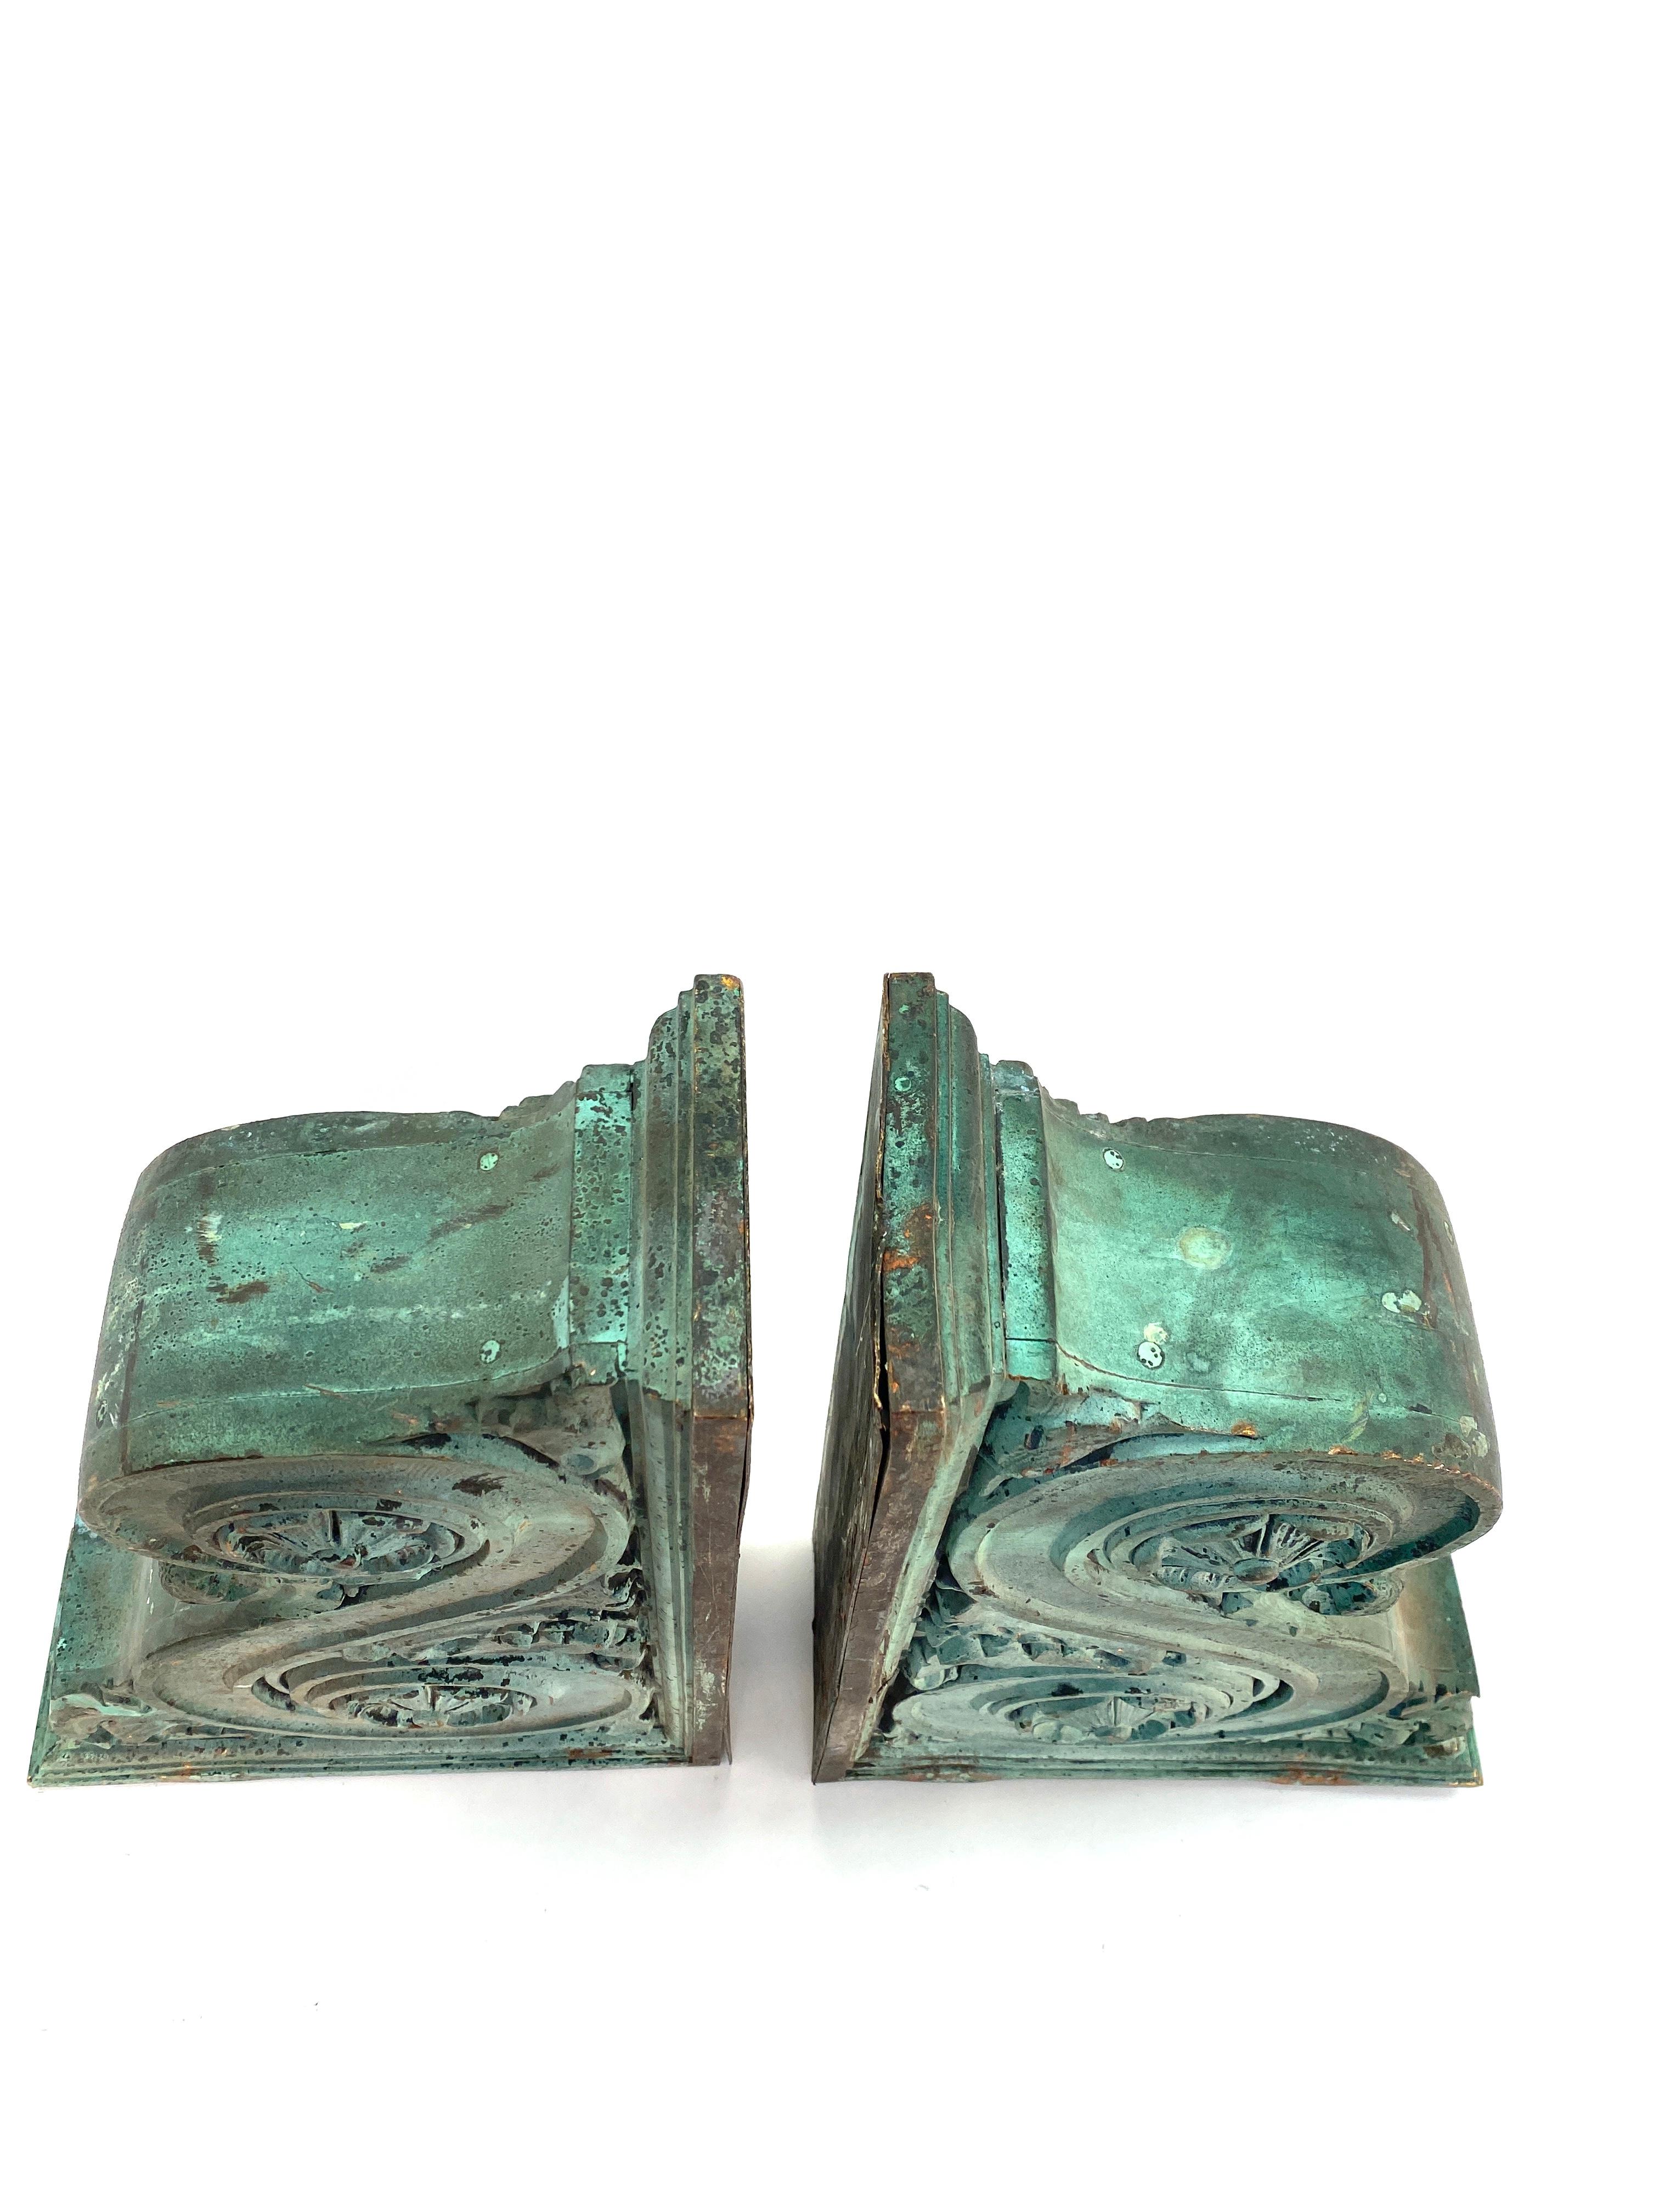 Neoclassical Revival Pair of Heavy Bronze Architectural Corbels